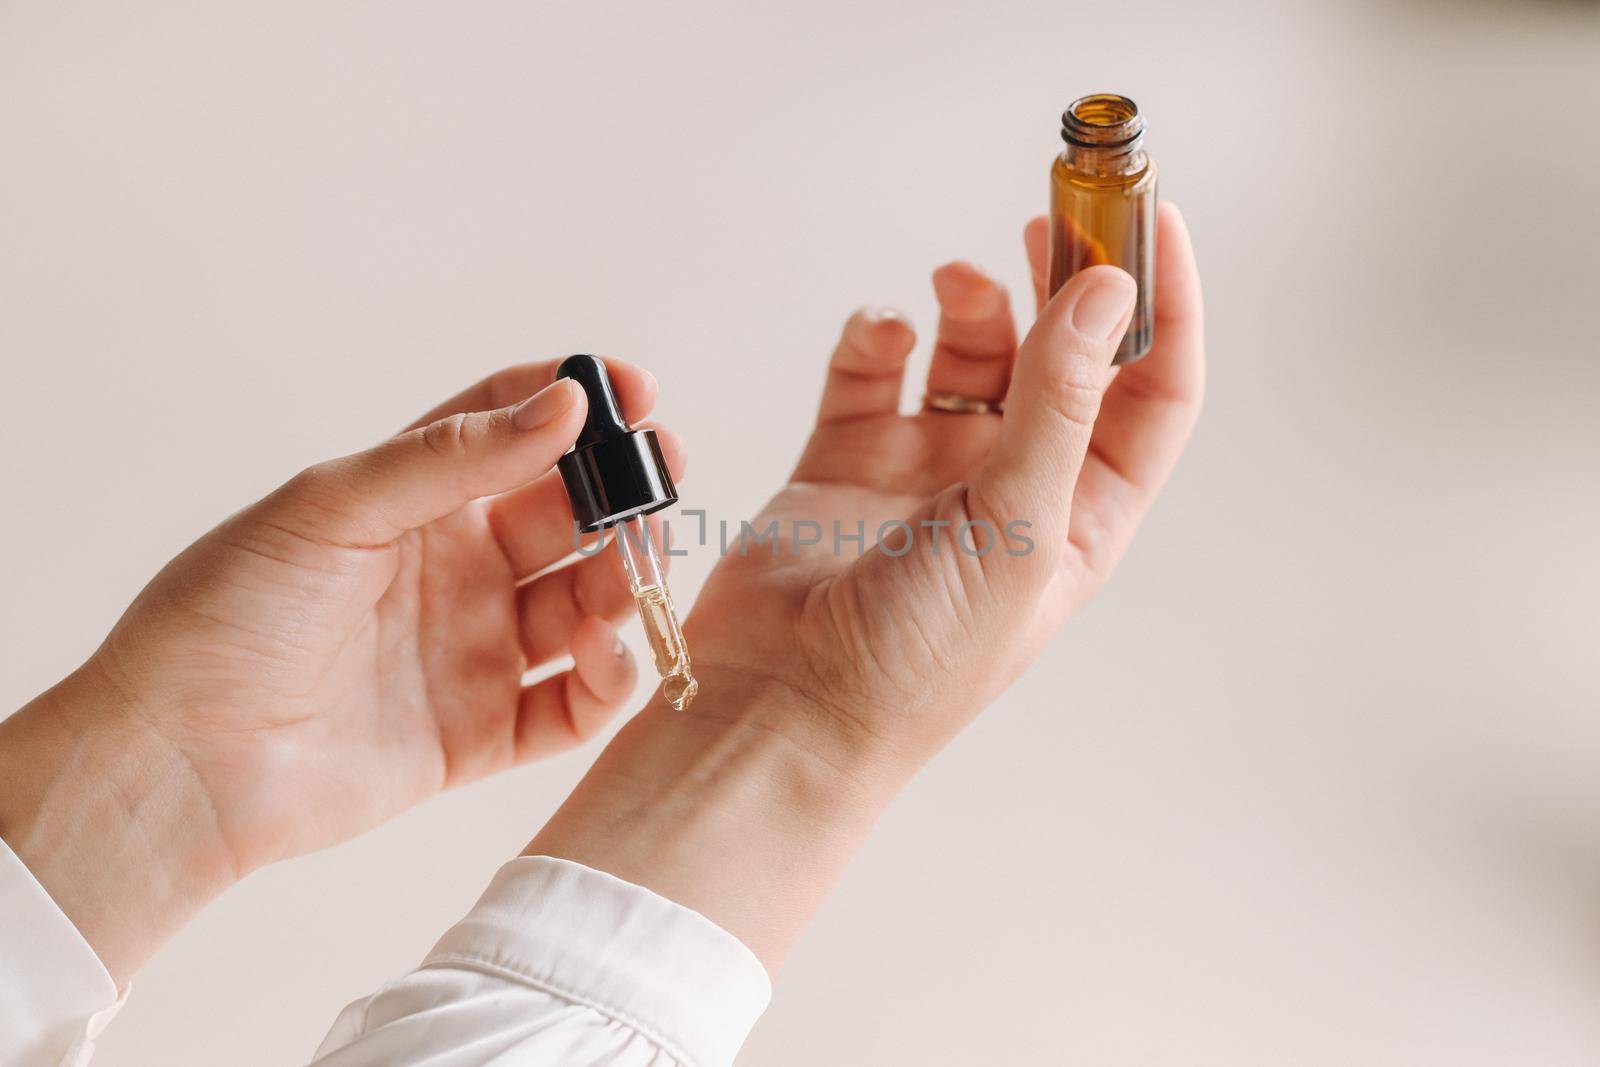 Close-up of a Woman's hands applying essential oil on her wrist indoors.